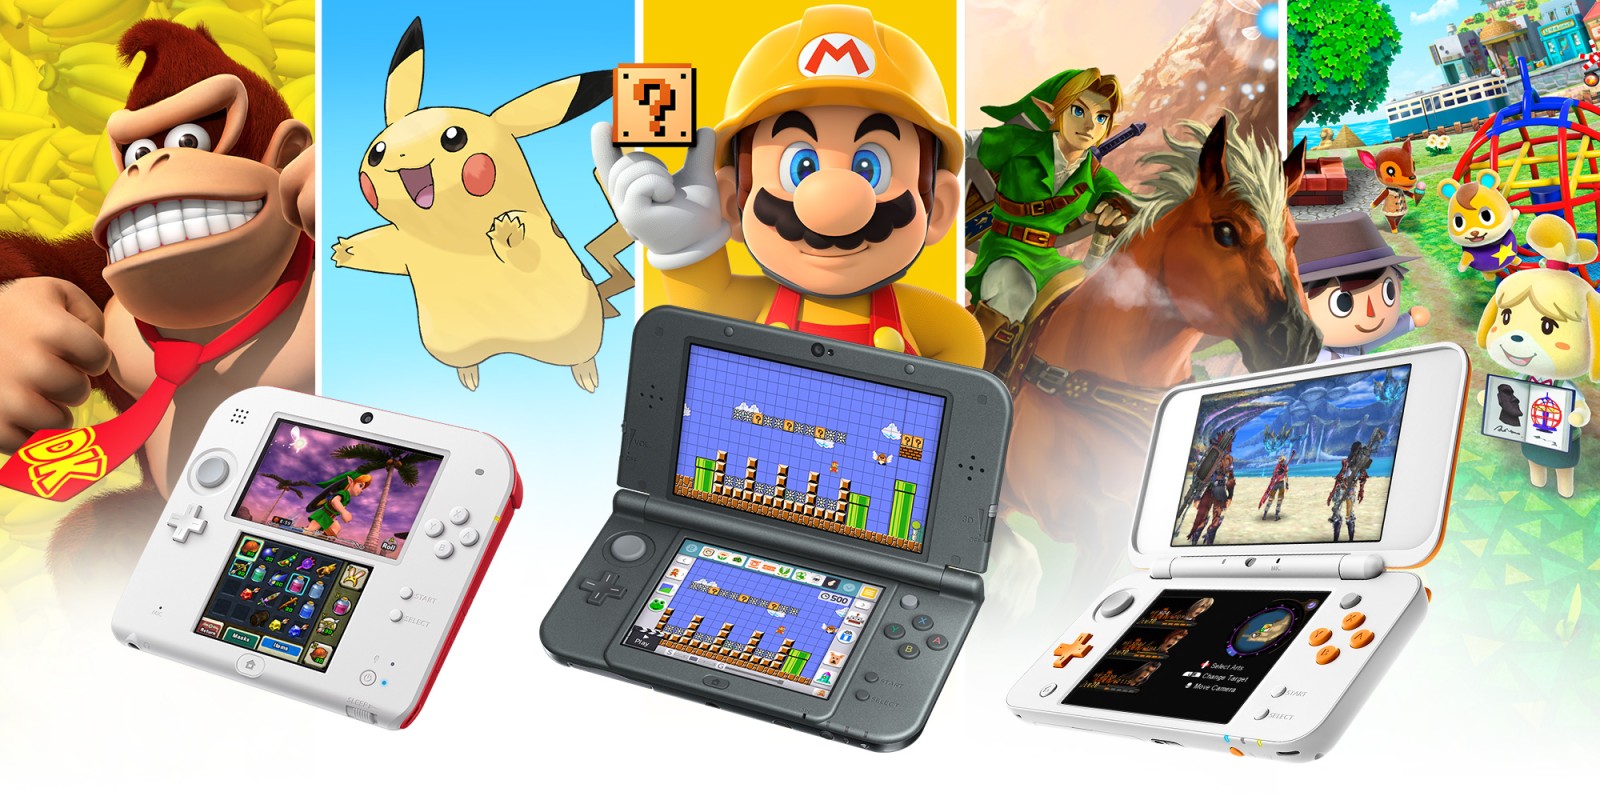 Nintendo Announce Discontinuation Of Online Services For Nintendo 3DS And Wii U